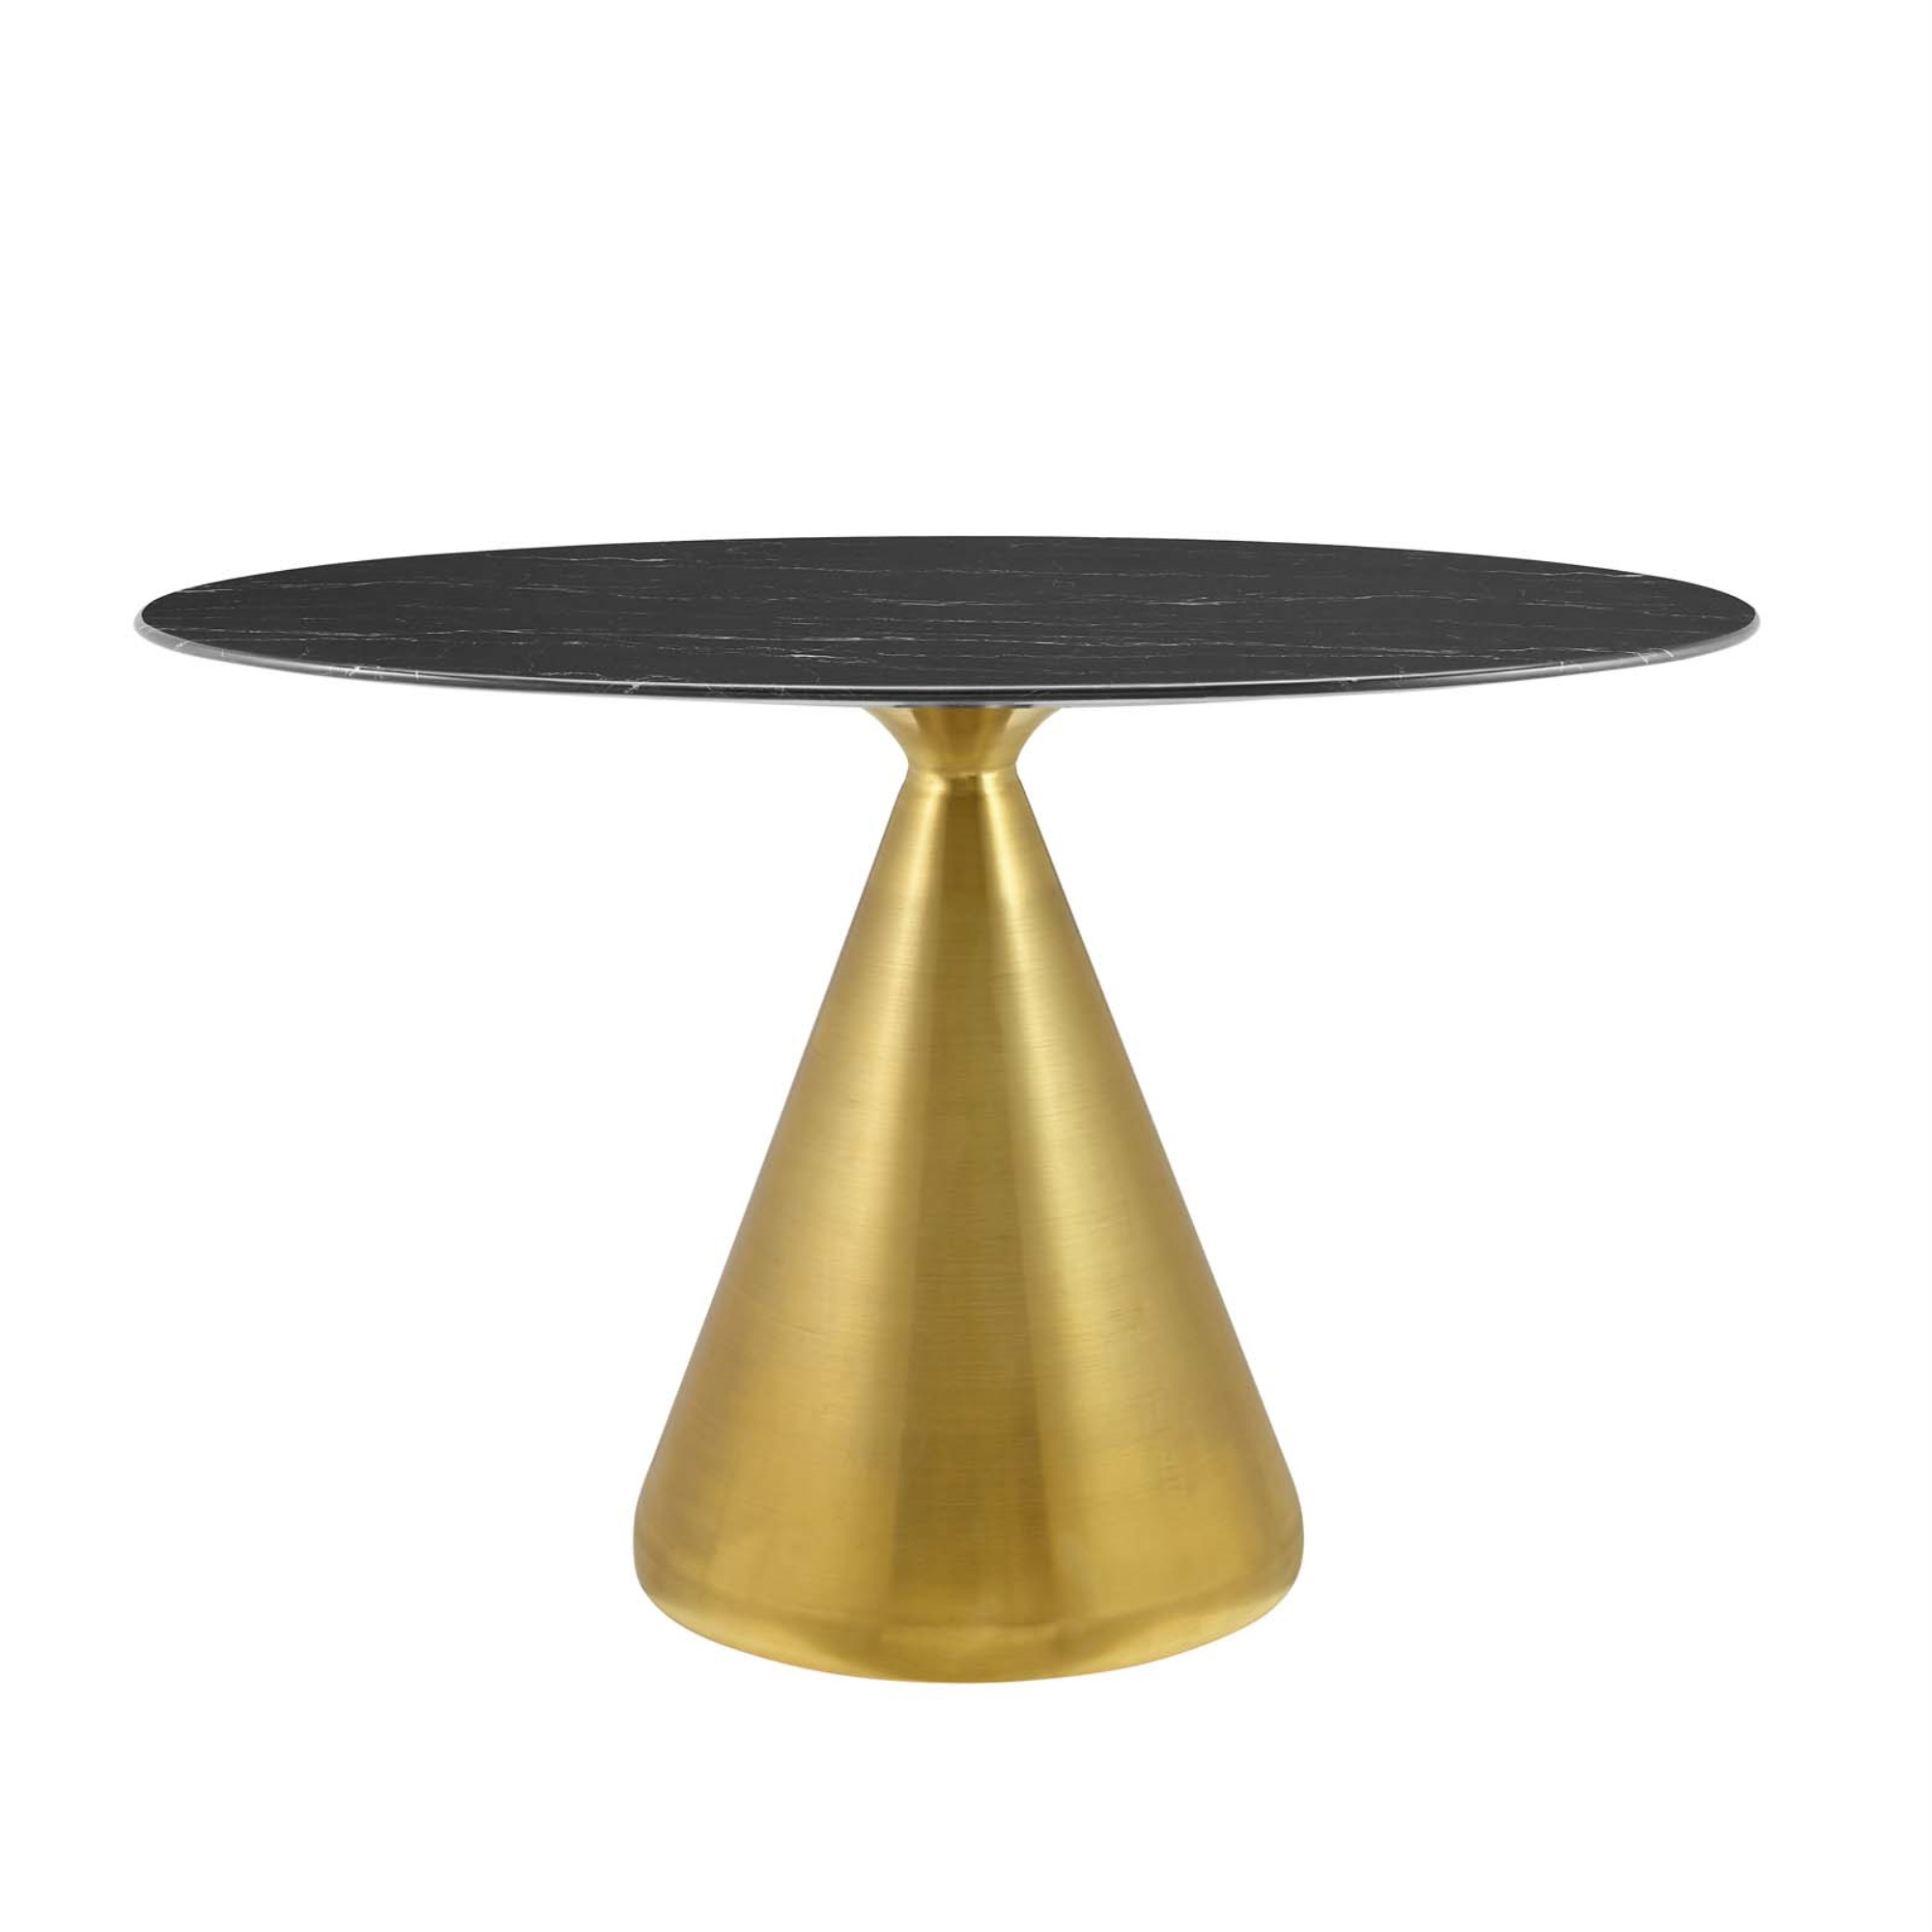 Ergode Tupelo 48" Oval Artificial Marble Dining Table - Modern Style, Mid-Century Charm, Polished Gold Metal Base, Easy to Clea